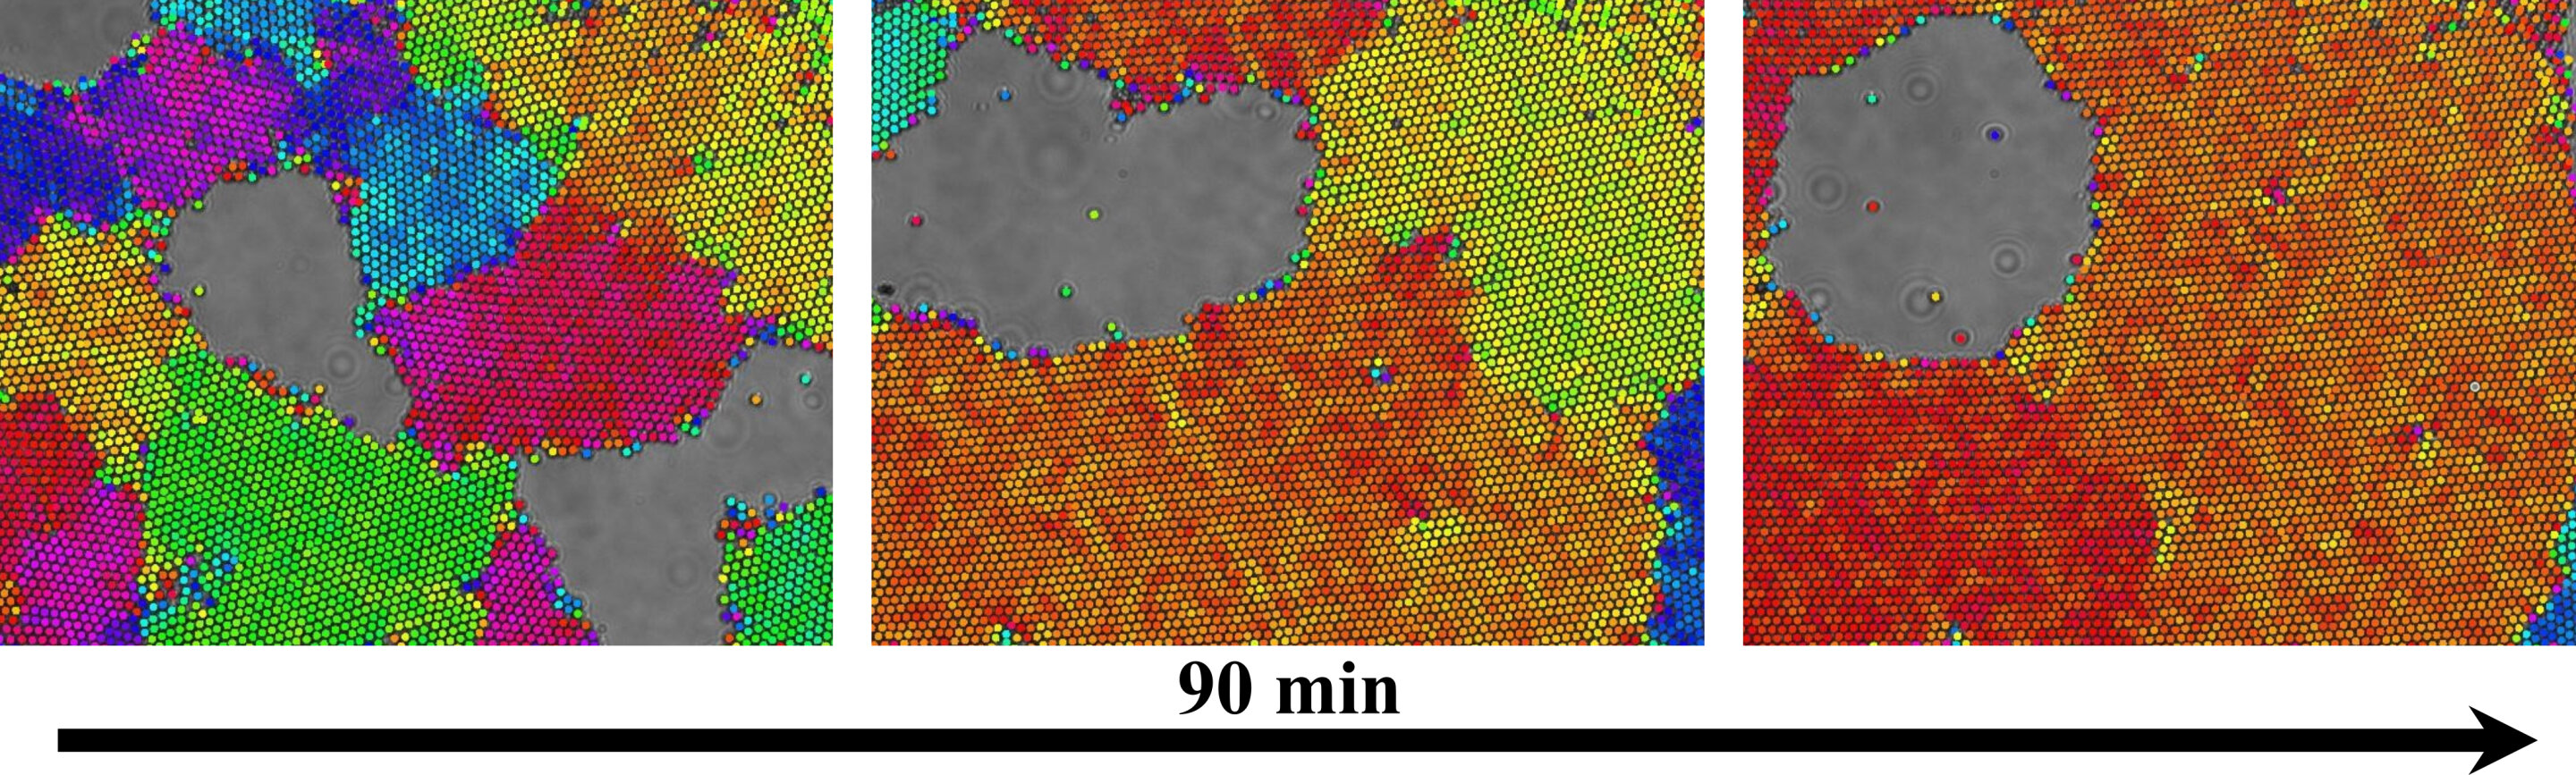 #Engineers model nanoscale crystal dynamics in easy-to-view system